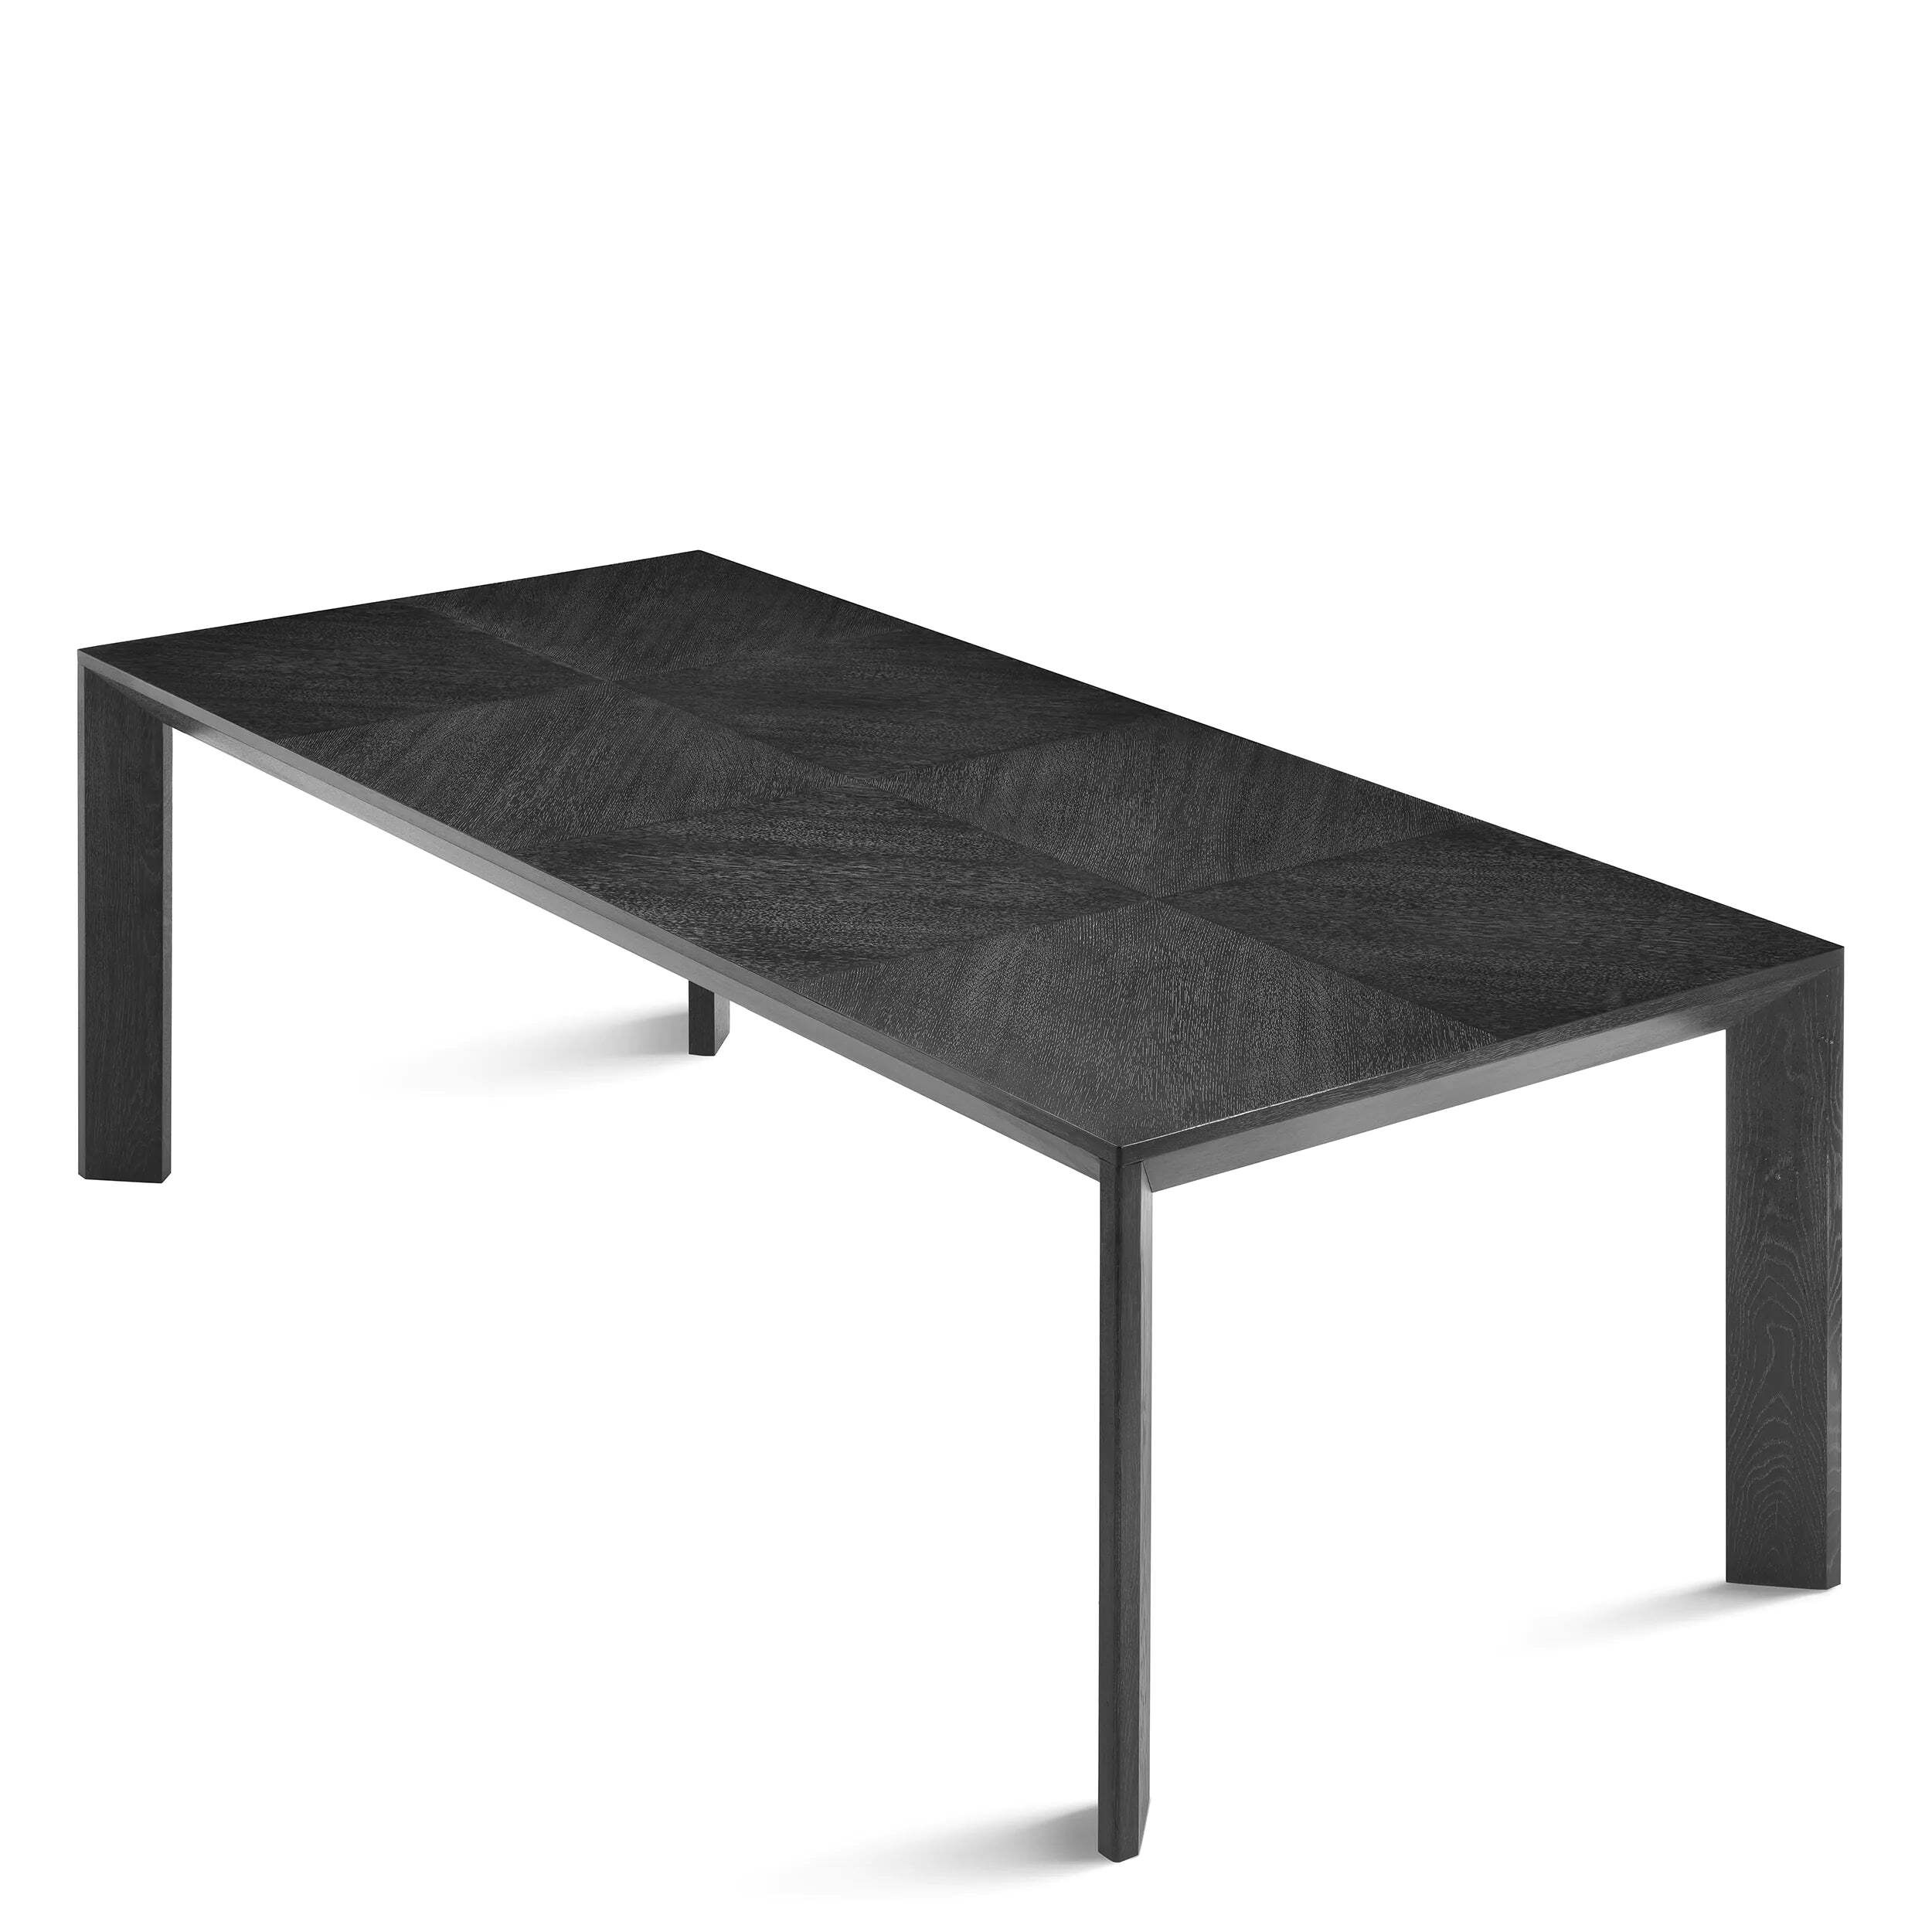 Eichholtz Tremont Dining Table in Charcoal Grey Oak Veneer - image 1